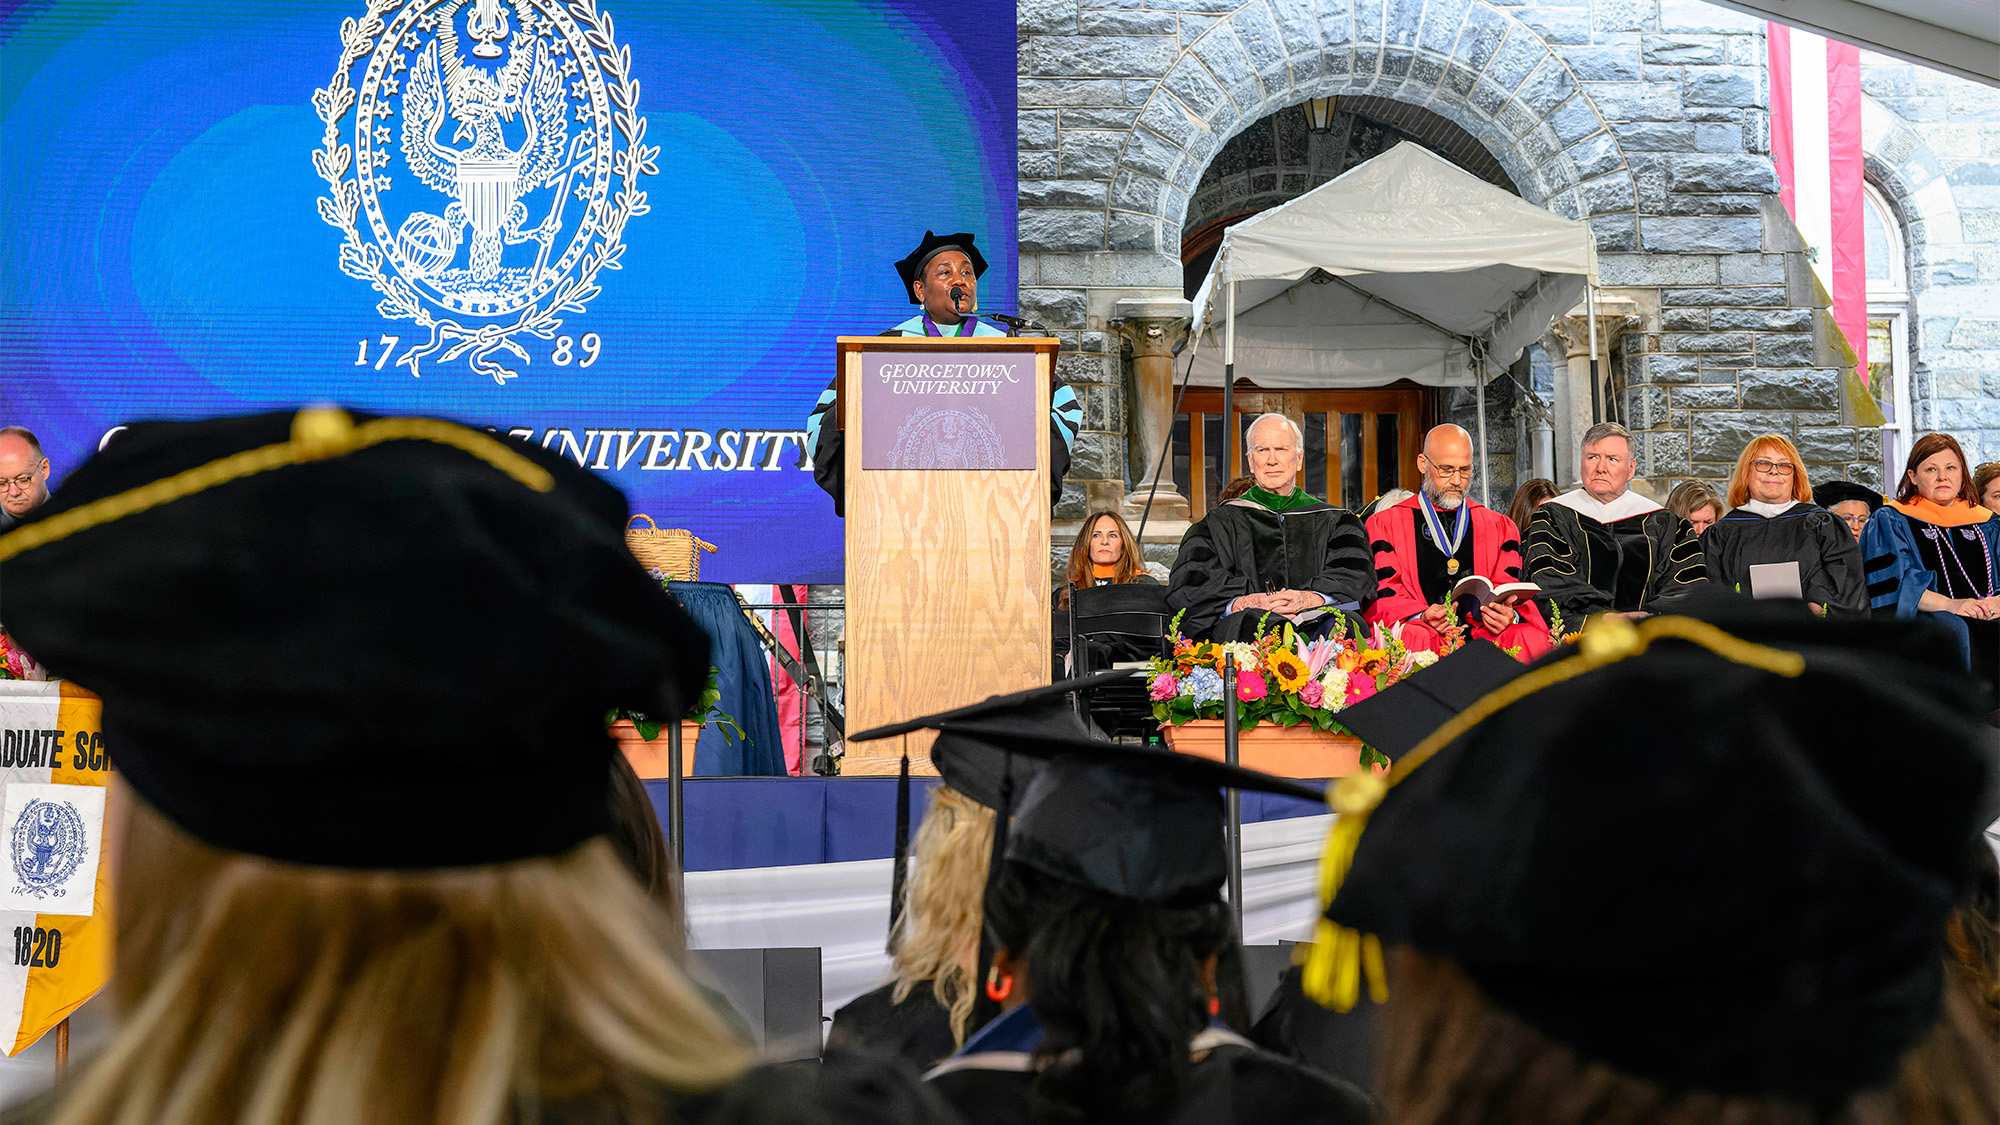 Dean Roberta Waite speaks at a podium before a group of graduating nursing students